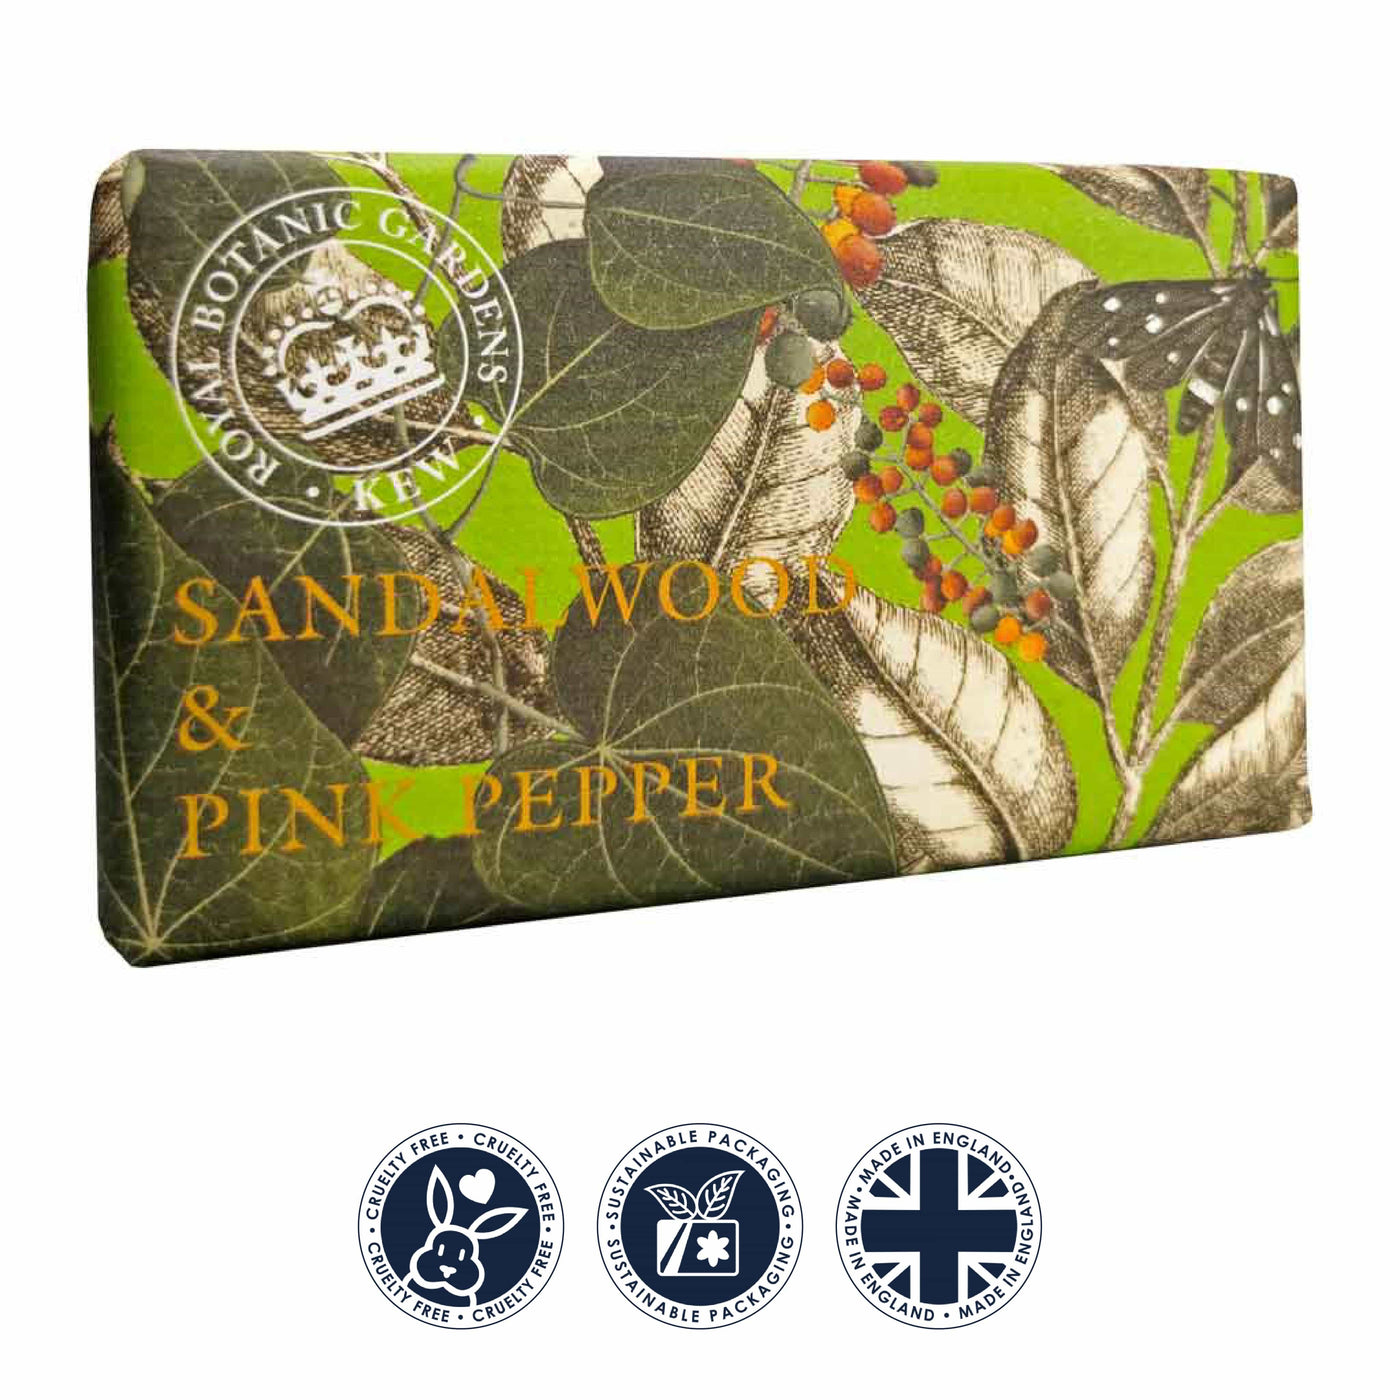 Kew Gardens Pink Pepper & Sandalwood Soap Bar from our Luxury Bar Soap collection by The English Soap Company